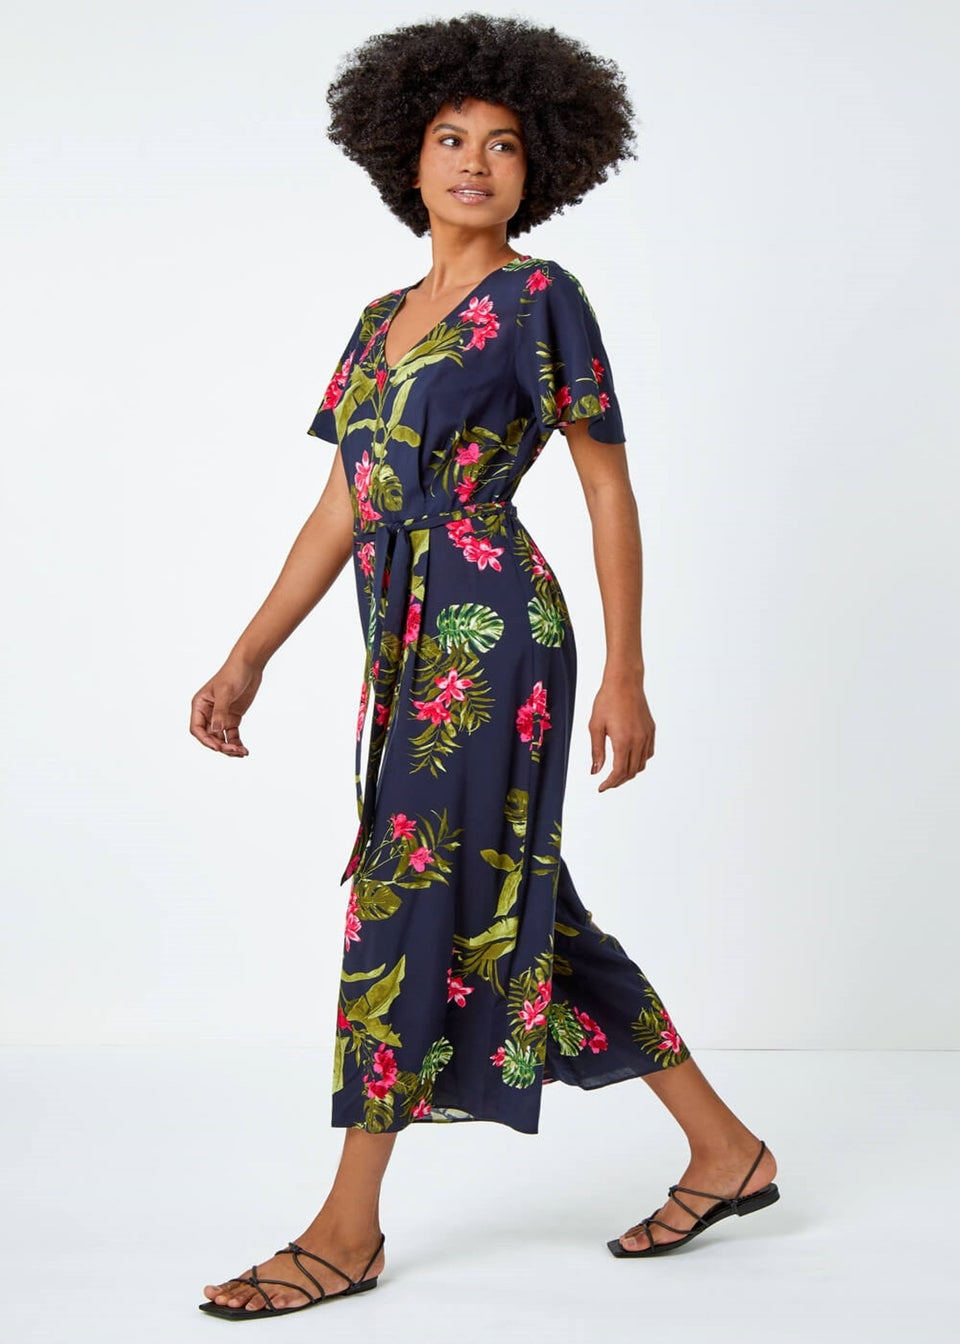 Roman Navy Tropical Print Belted Jumpsuit